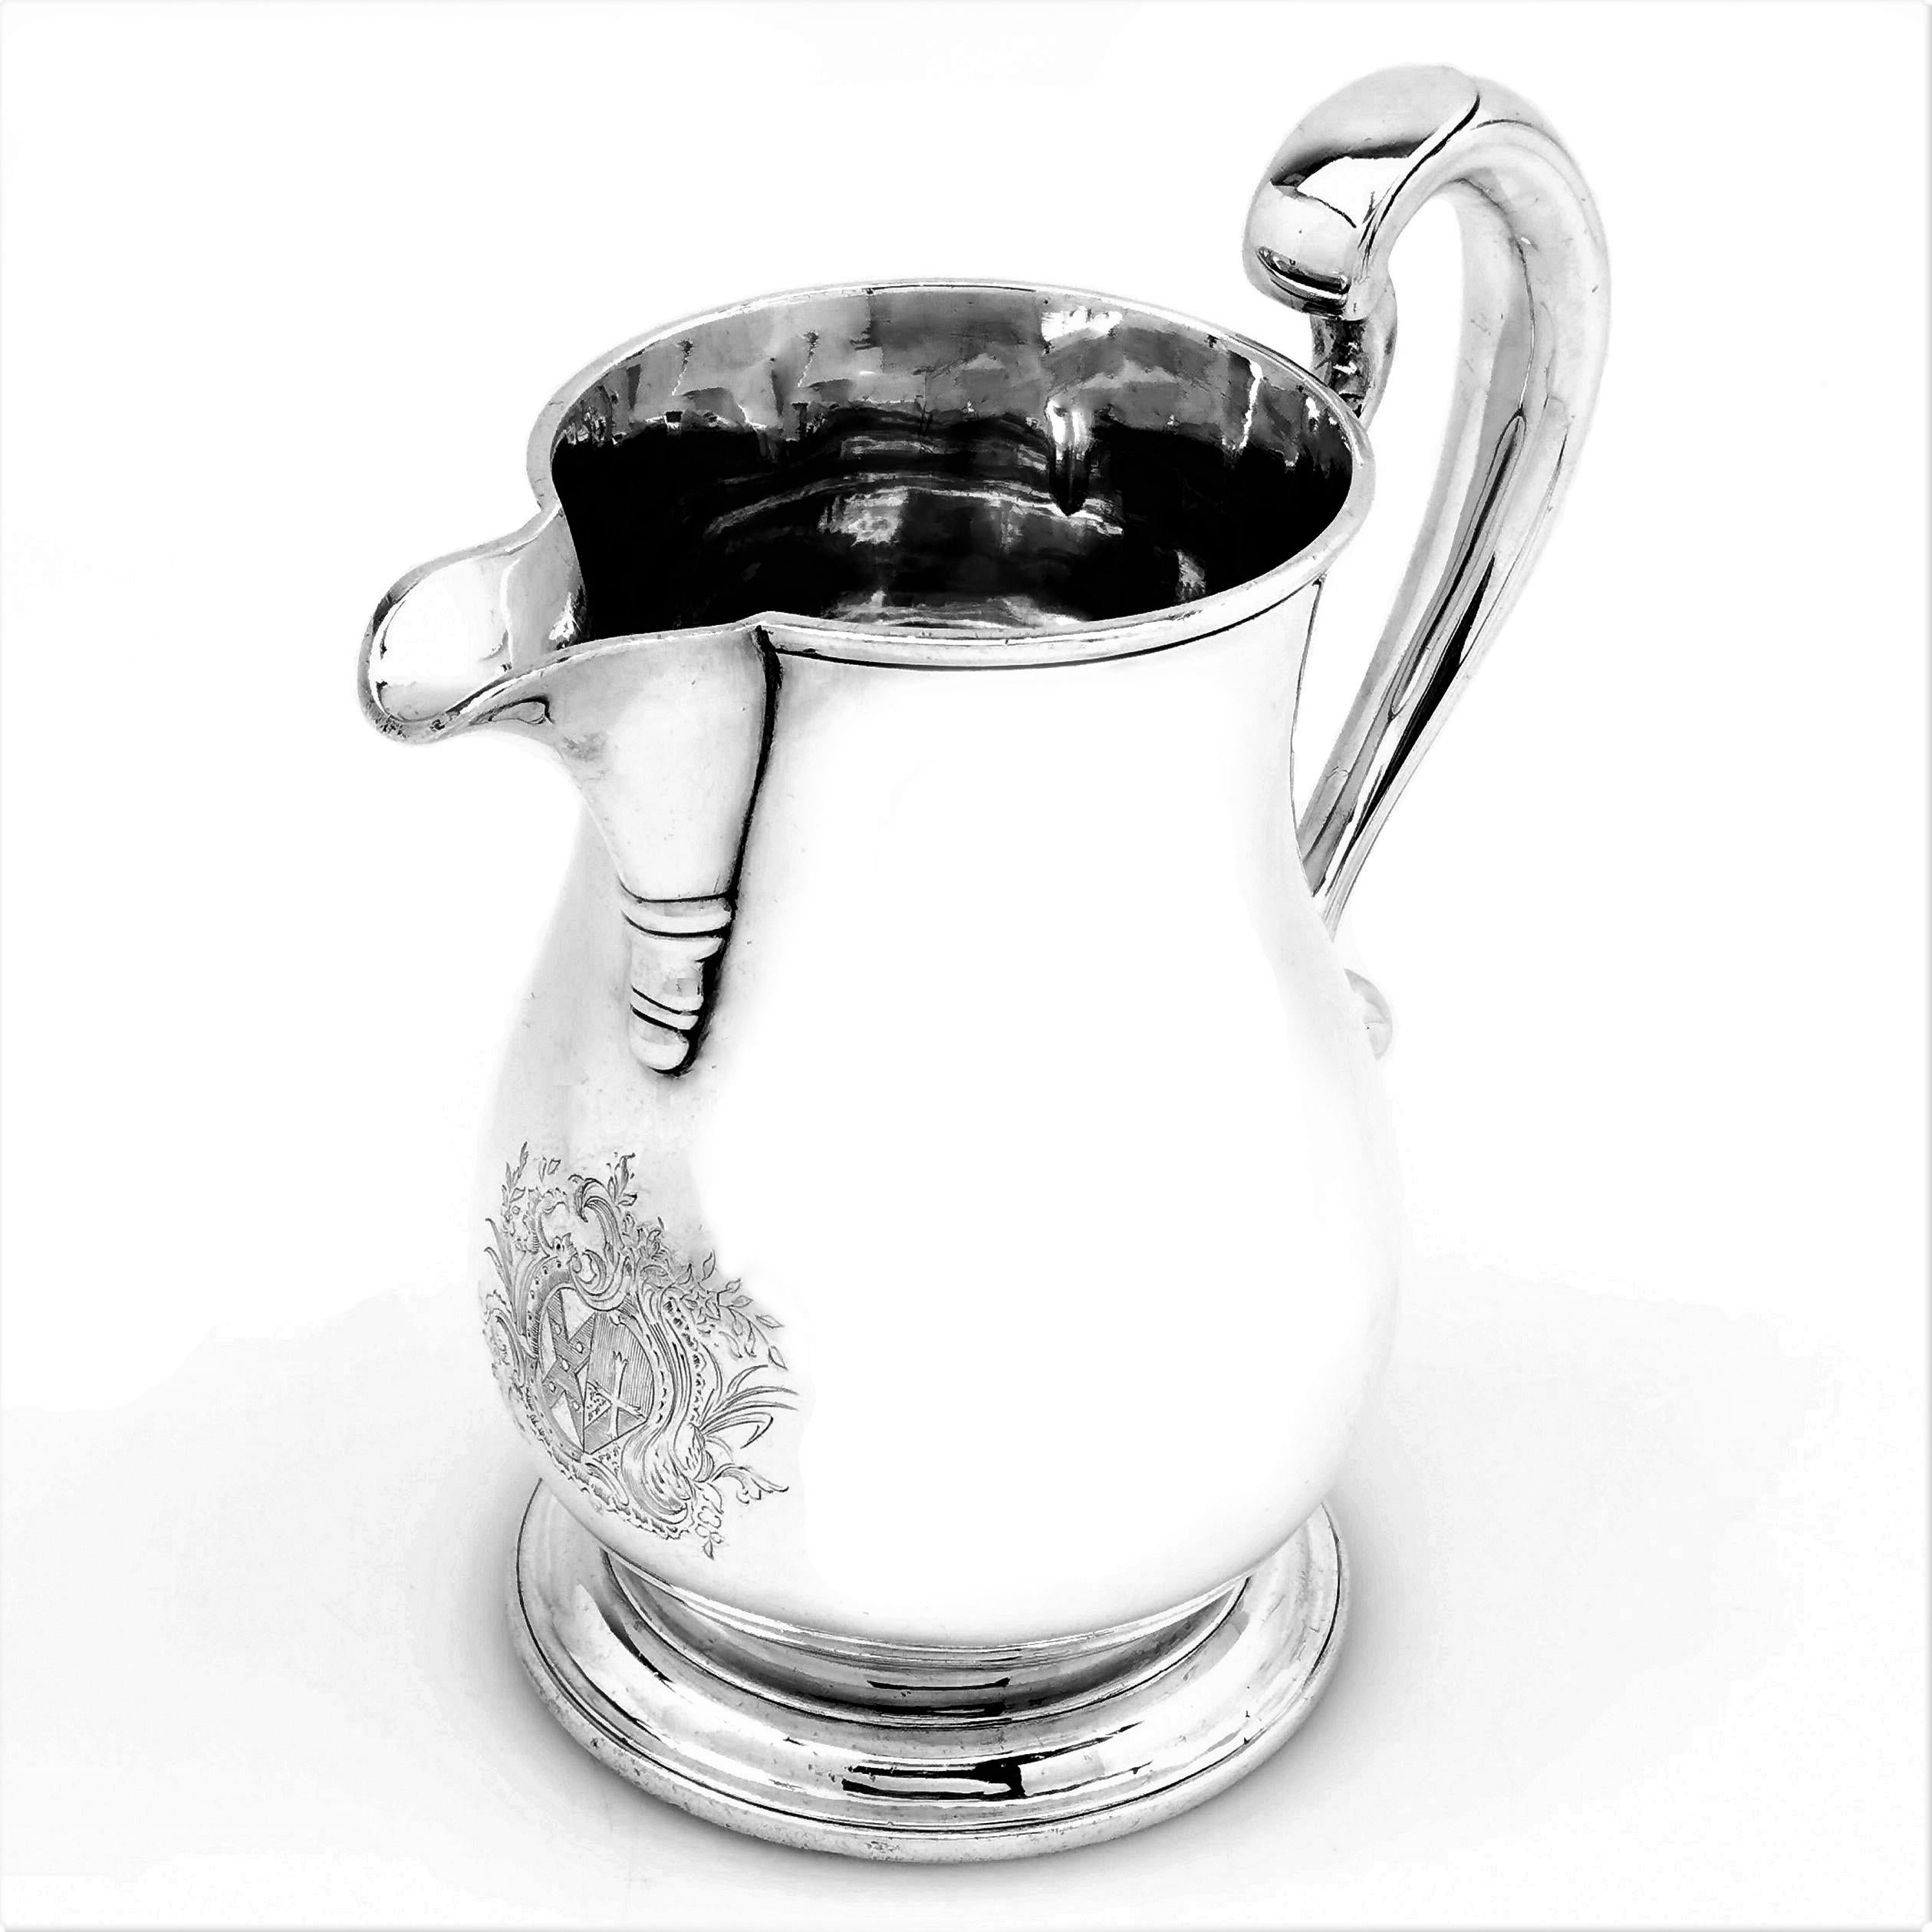 An antique George II Sterling Silver Jug in a Classic baluster shape. The Jug stands on a low spread food and has an impressive scroll handle. This Georgian Jug has a large silver crest engraved opposite the handle.

Made in London in 1762 by Thomas